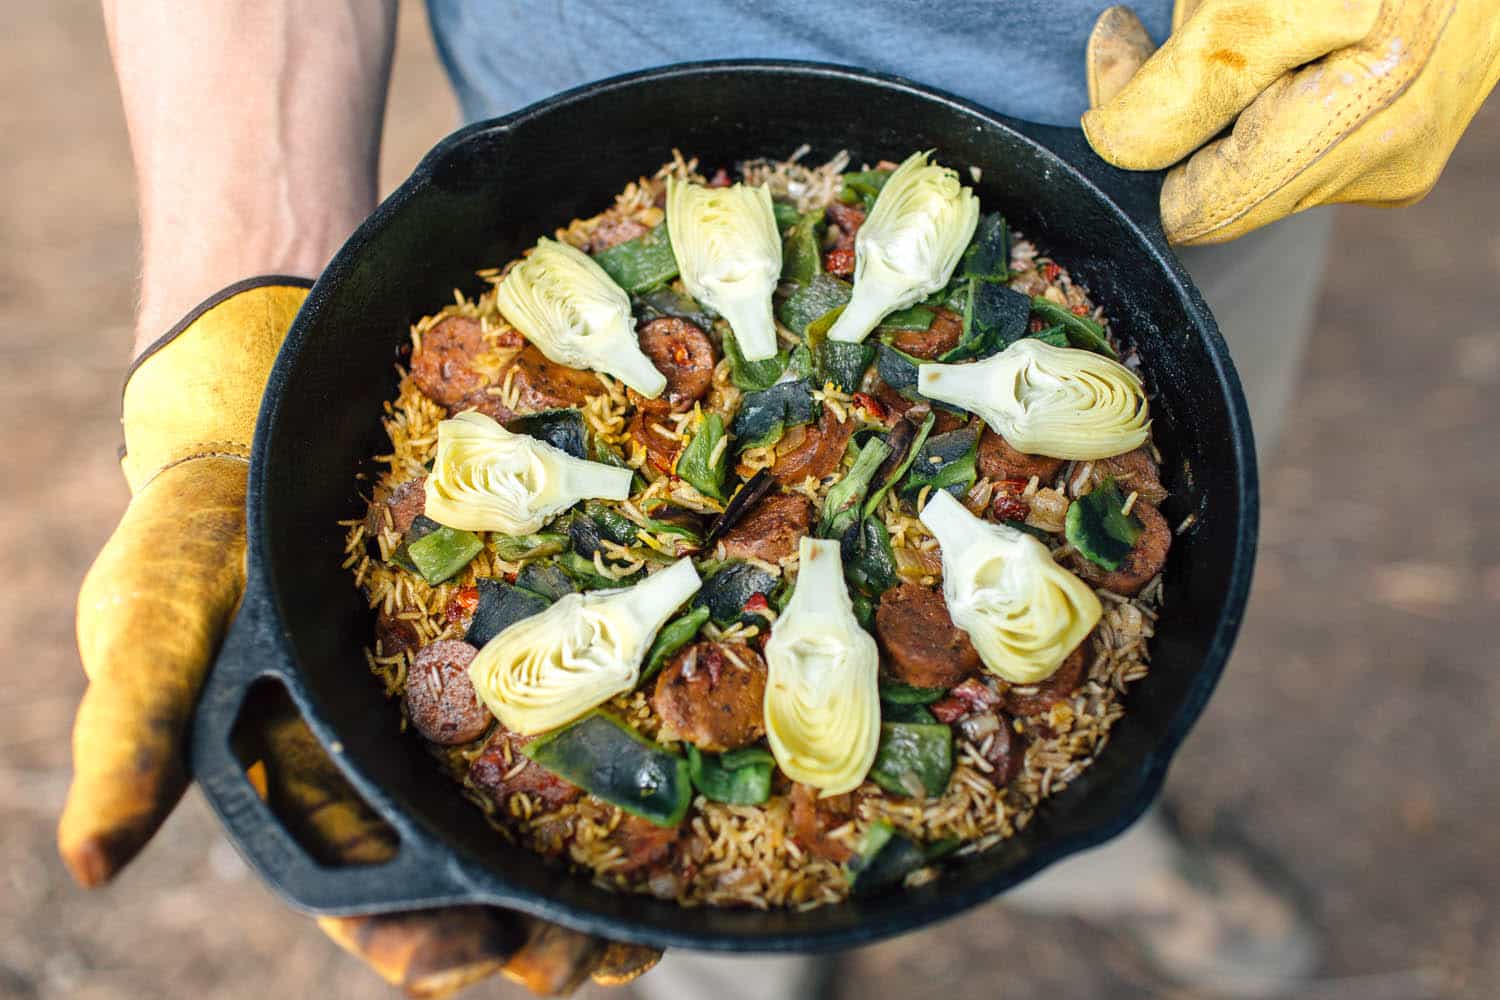 Paella might be the ultimate one pot camping meal - you can easily scale it up for groups and change the ingredients to whatever sounds tasty to you!